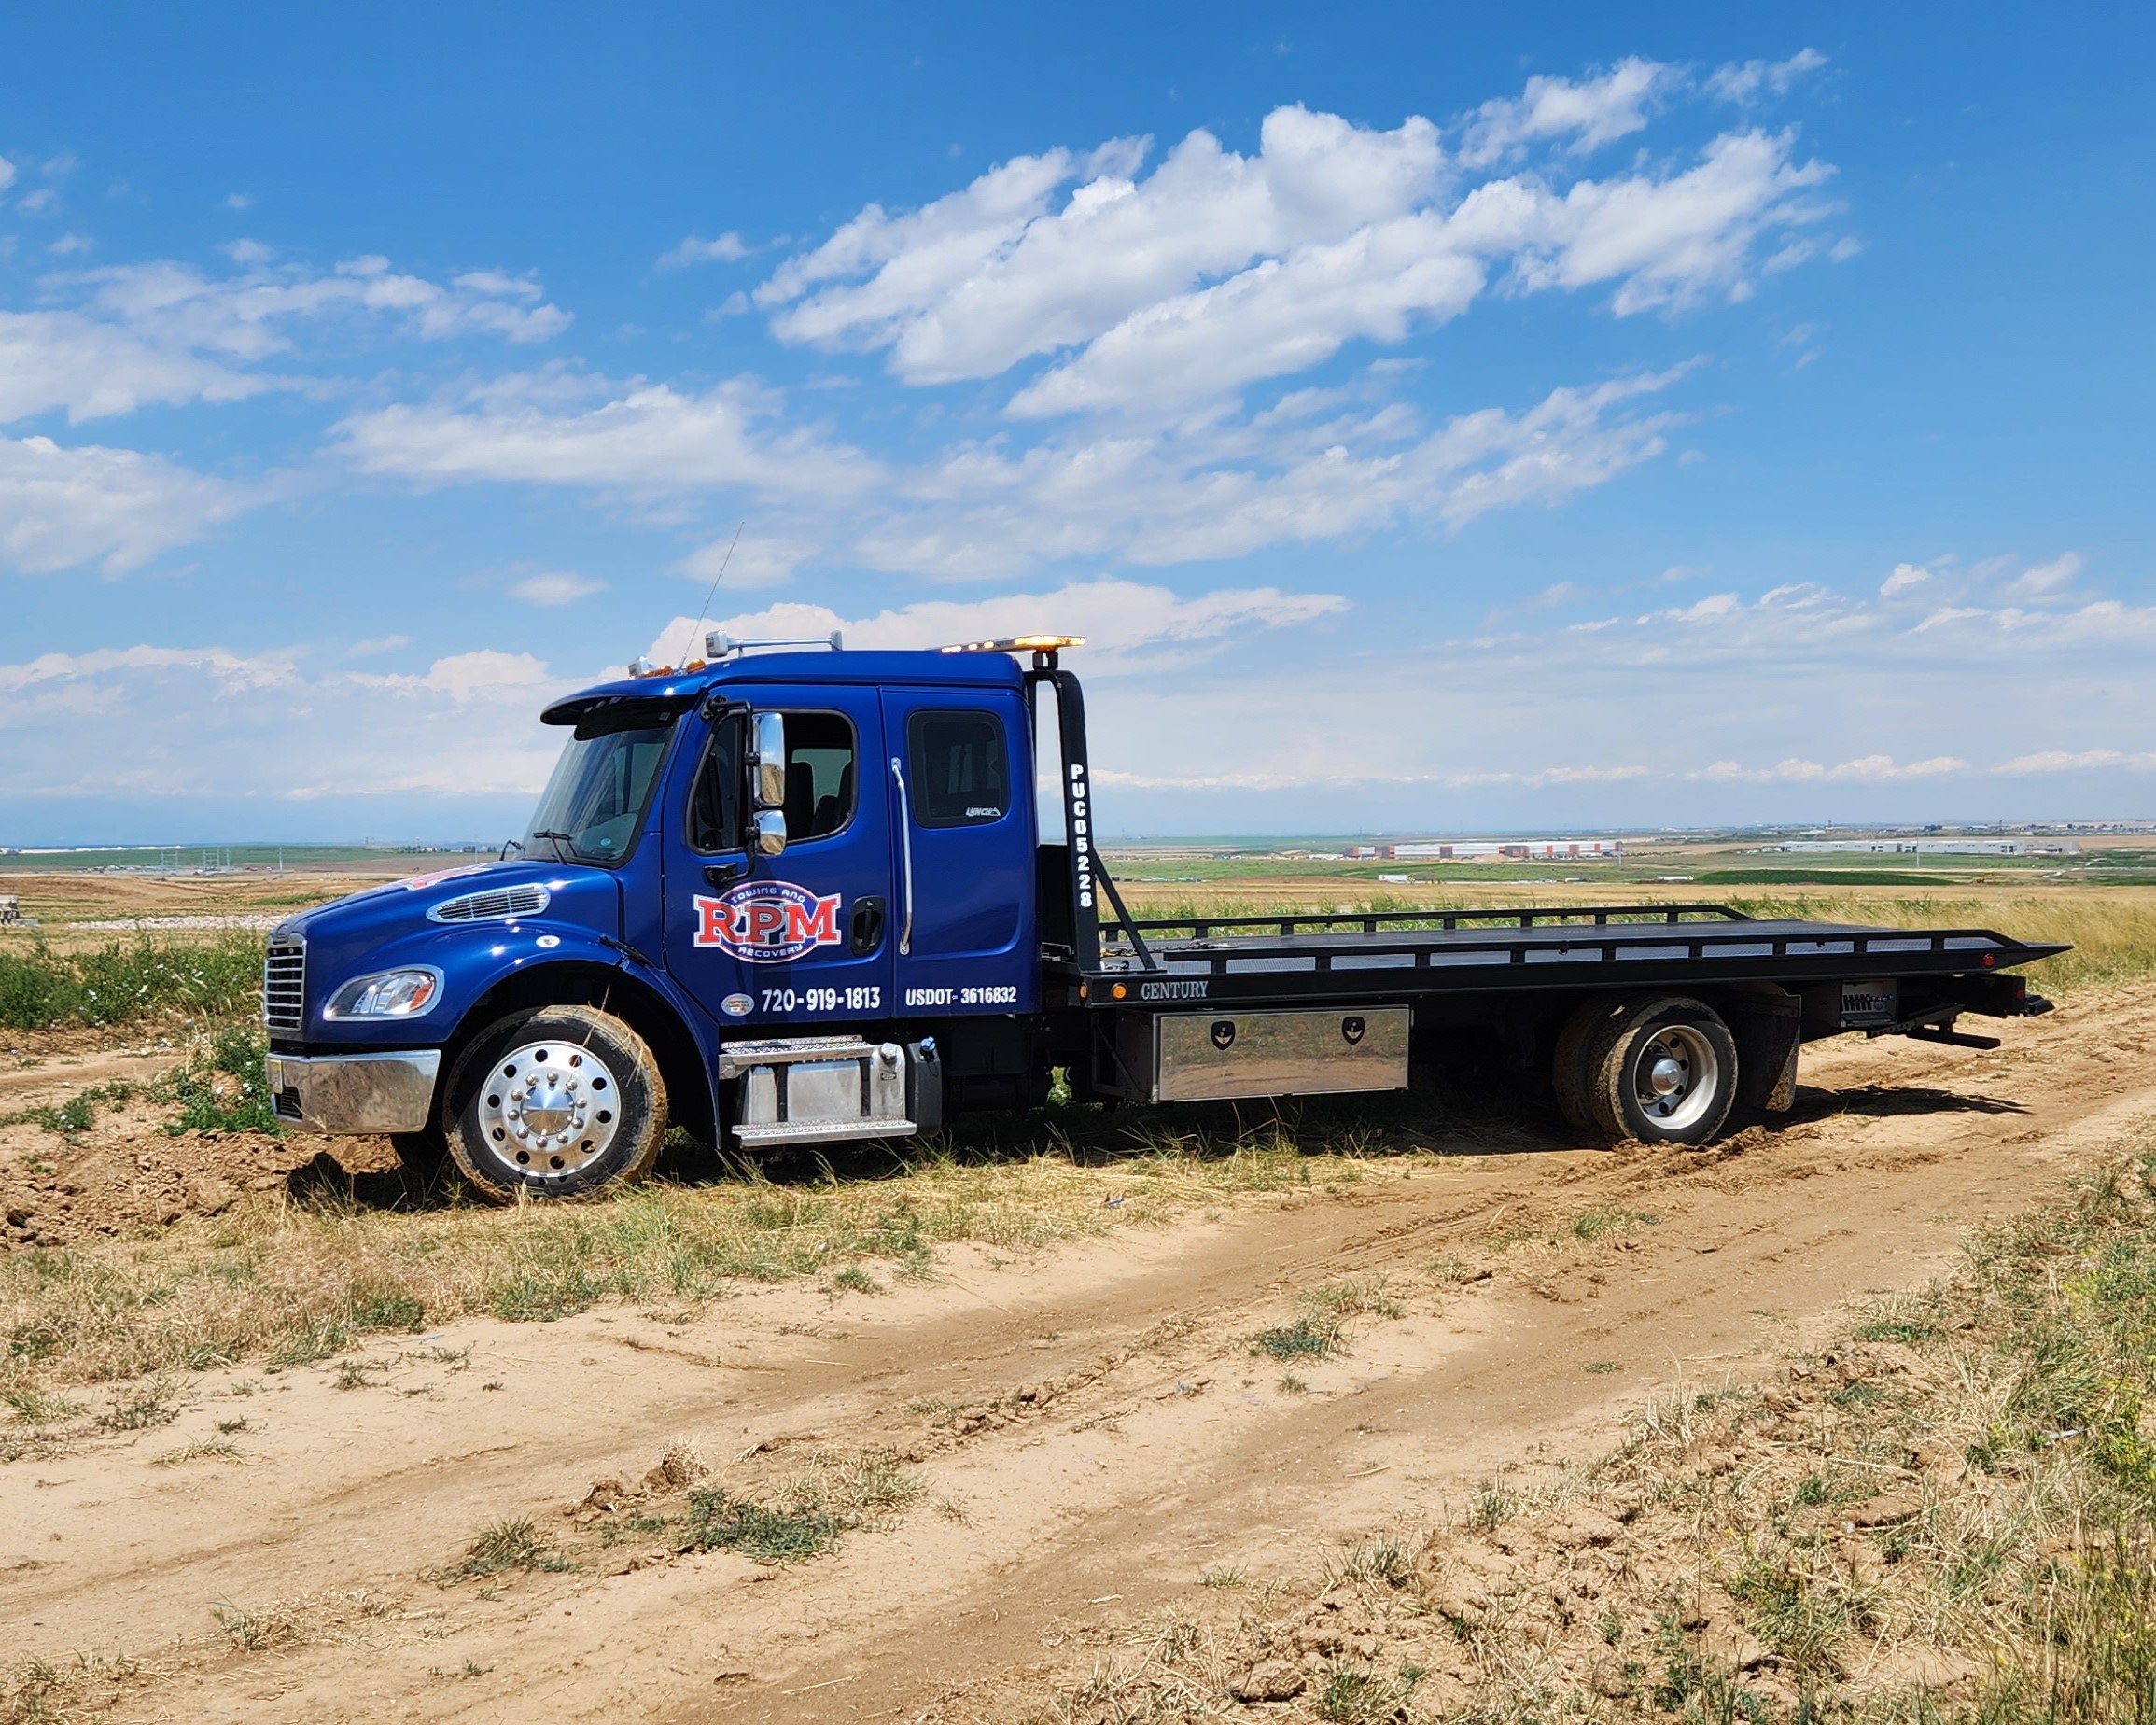 this image shows towing services in South Denver, CO